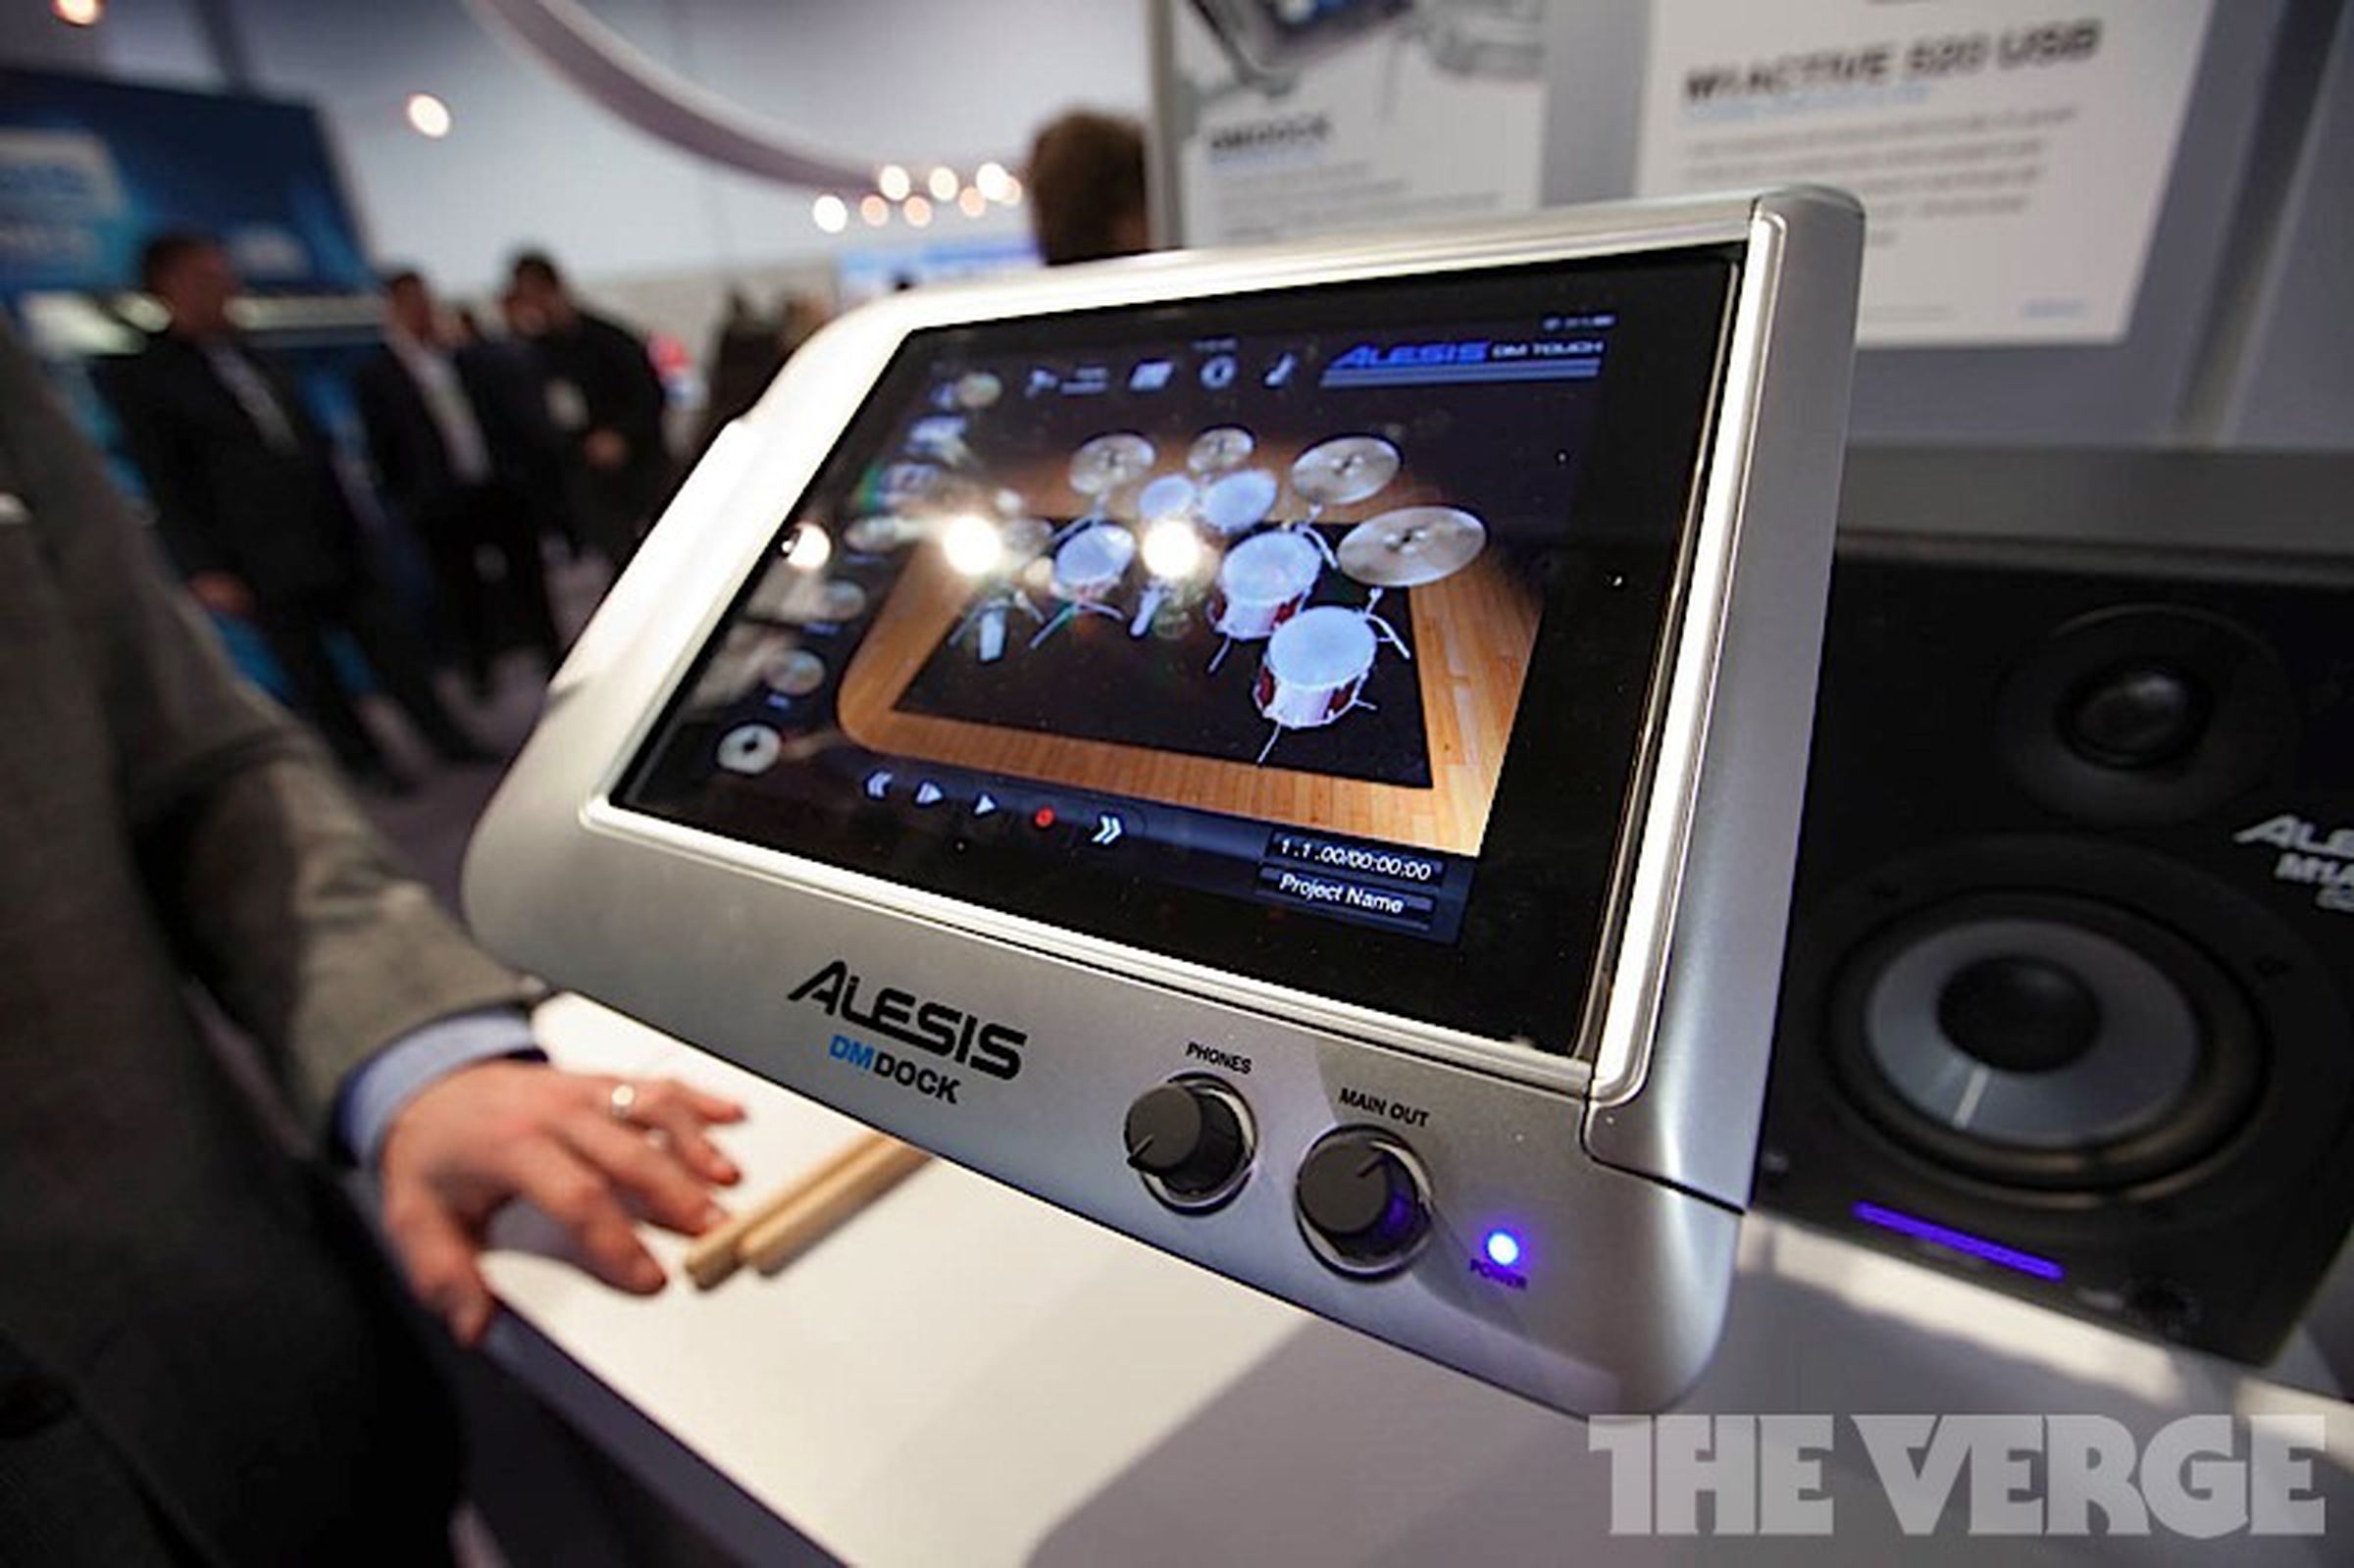 Alesis DM Dock and Amp Dock for iPad